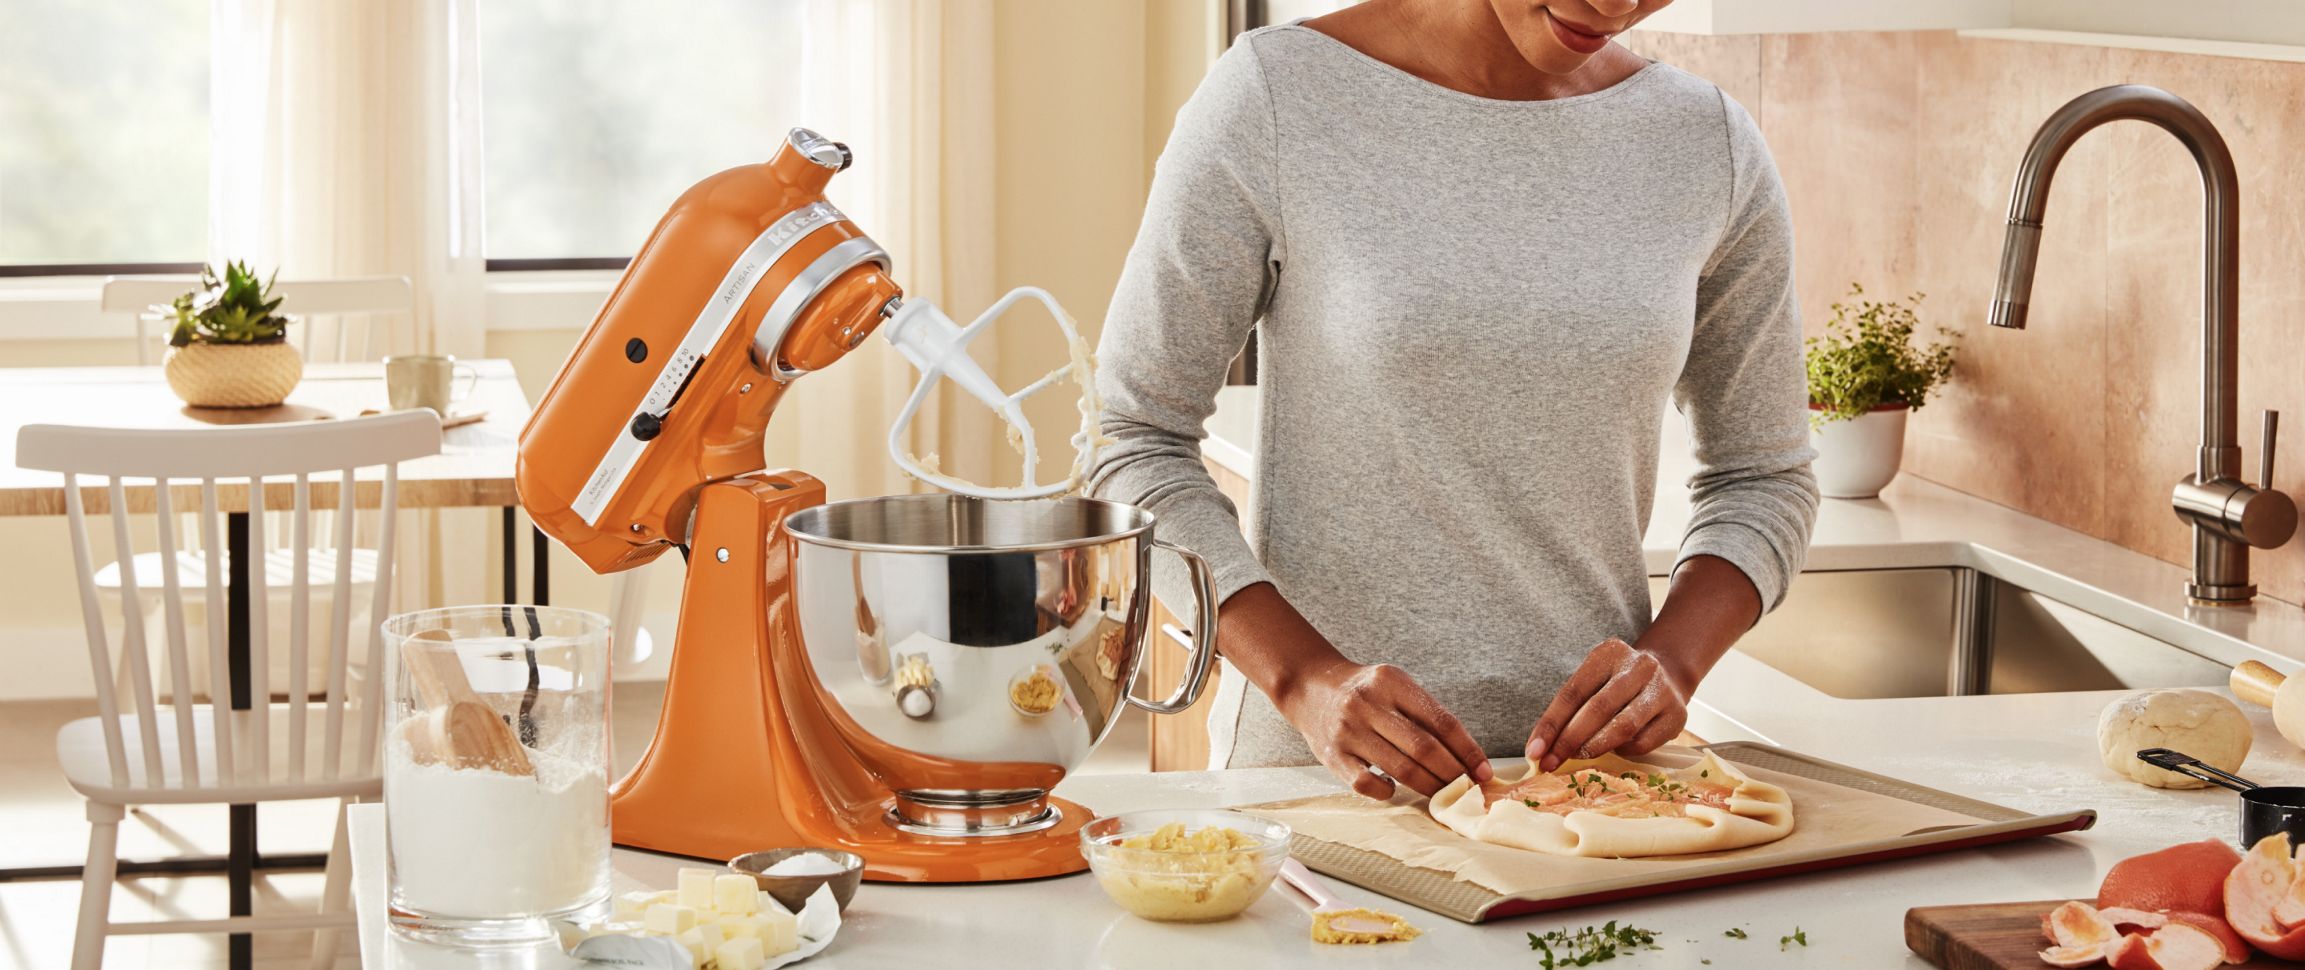 KitchenAid® Tilt-Head Stand Mixer with Stainless Steel Bowl.